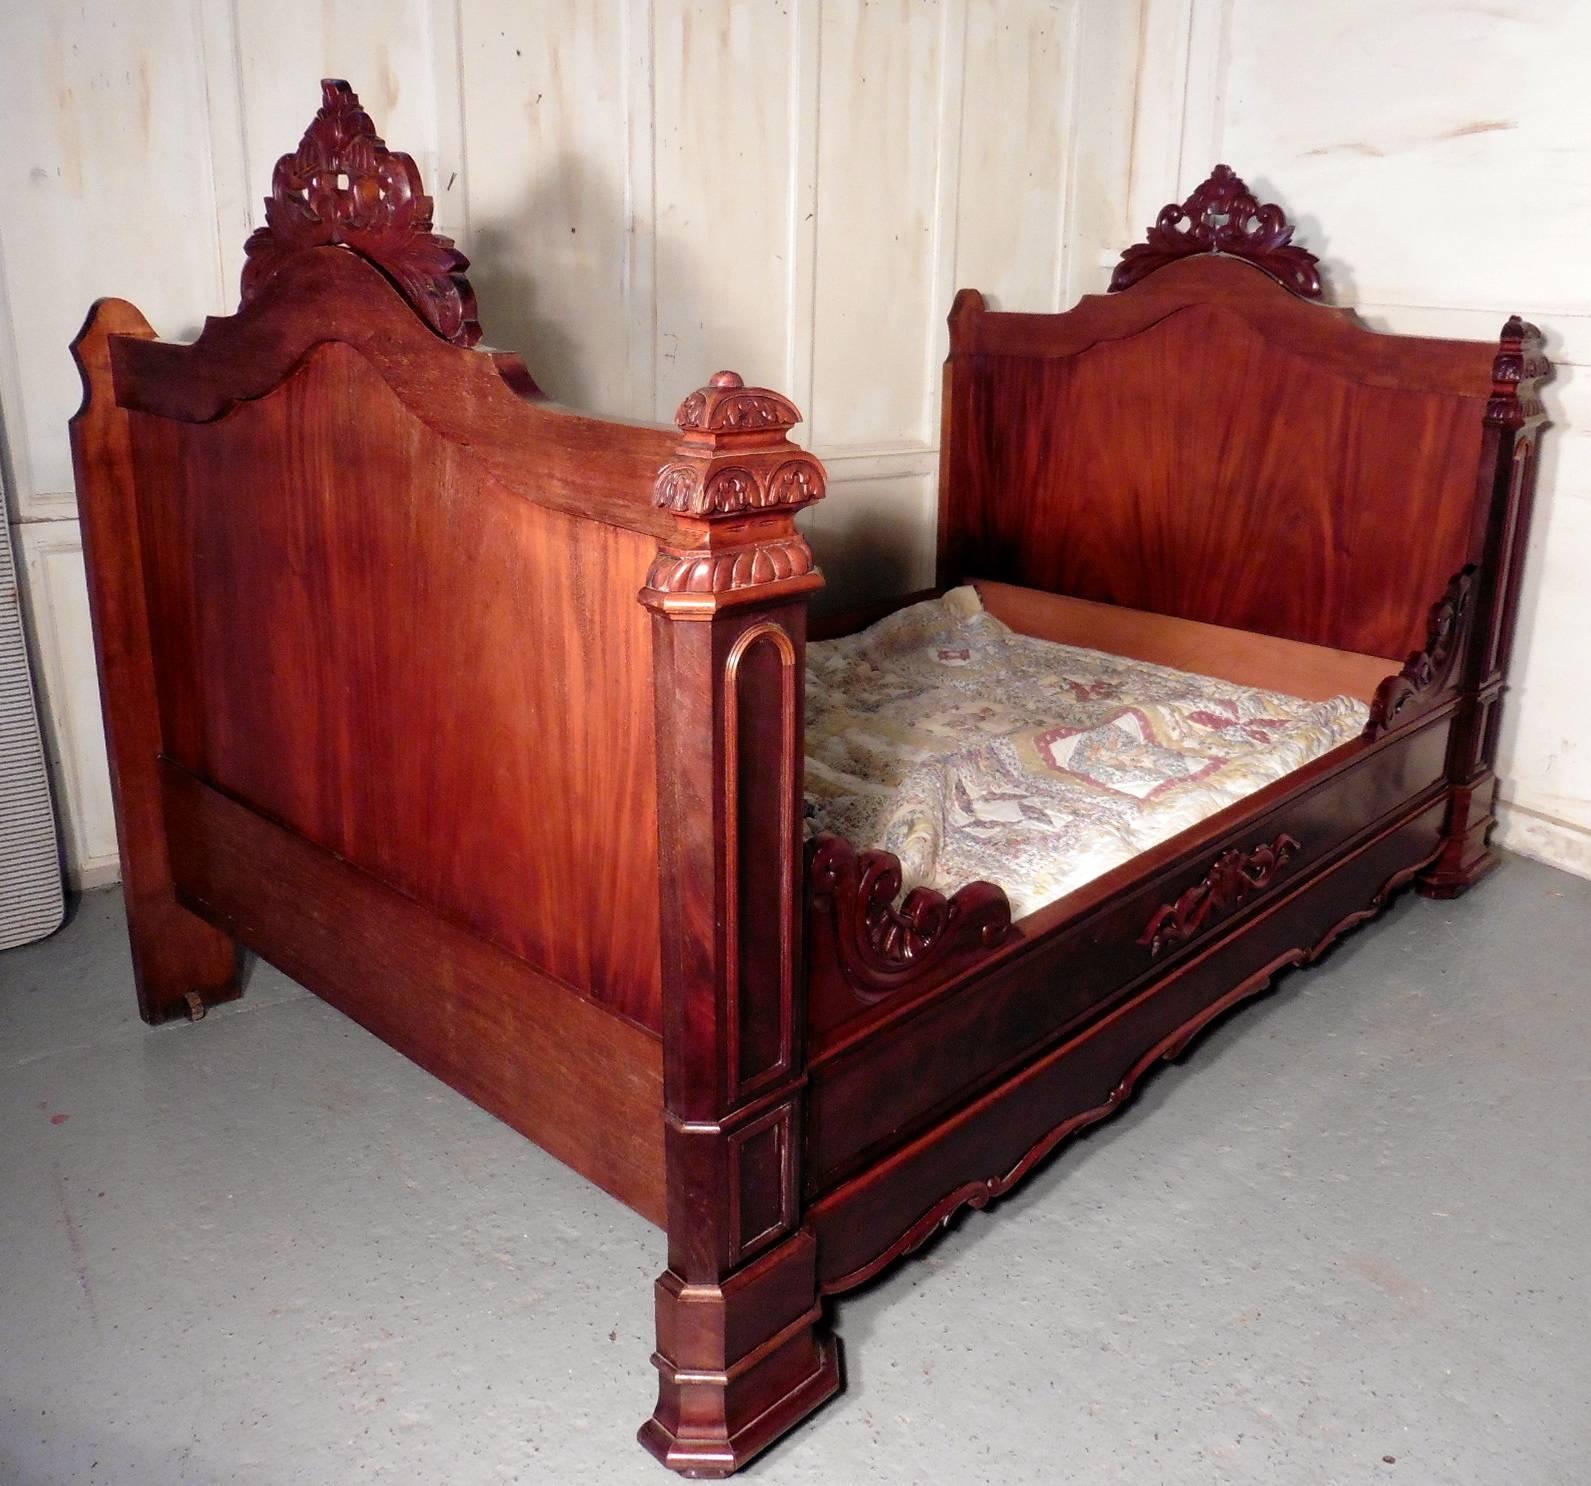 French Provincial French Flame Mahogany and Walnut Sleigh Bed or Empire Style Daybed